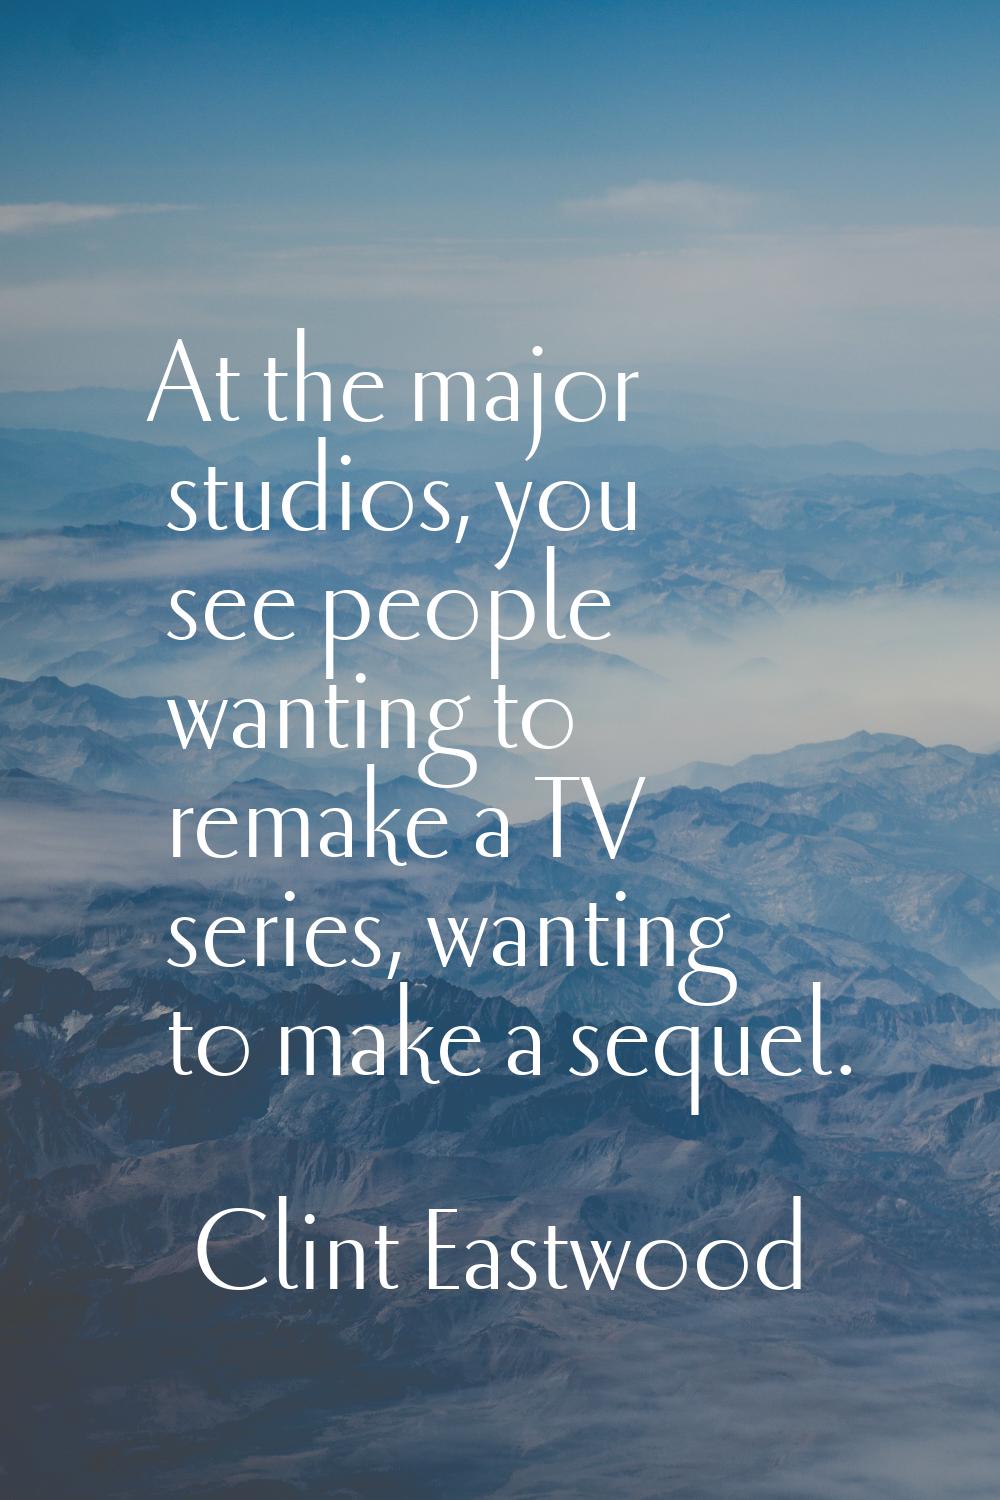 At the major studios, you see people wanting to remake a TV series, wanting to make a sequel.